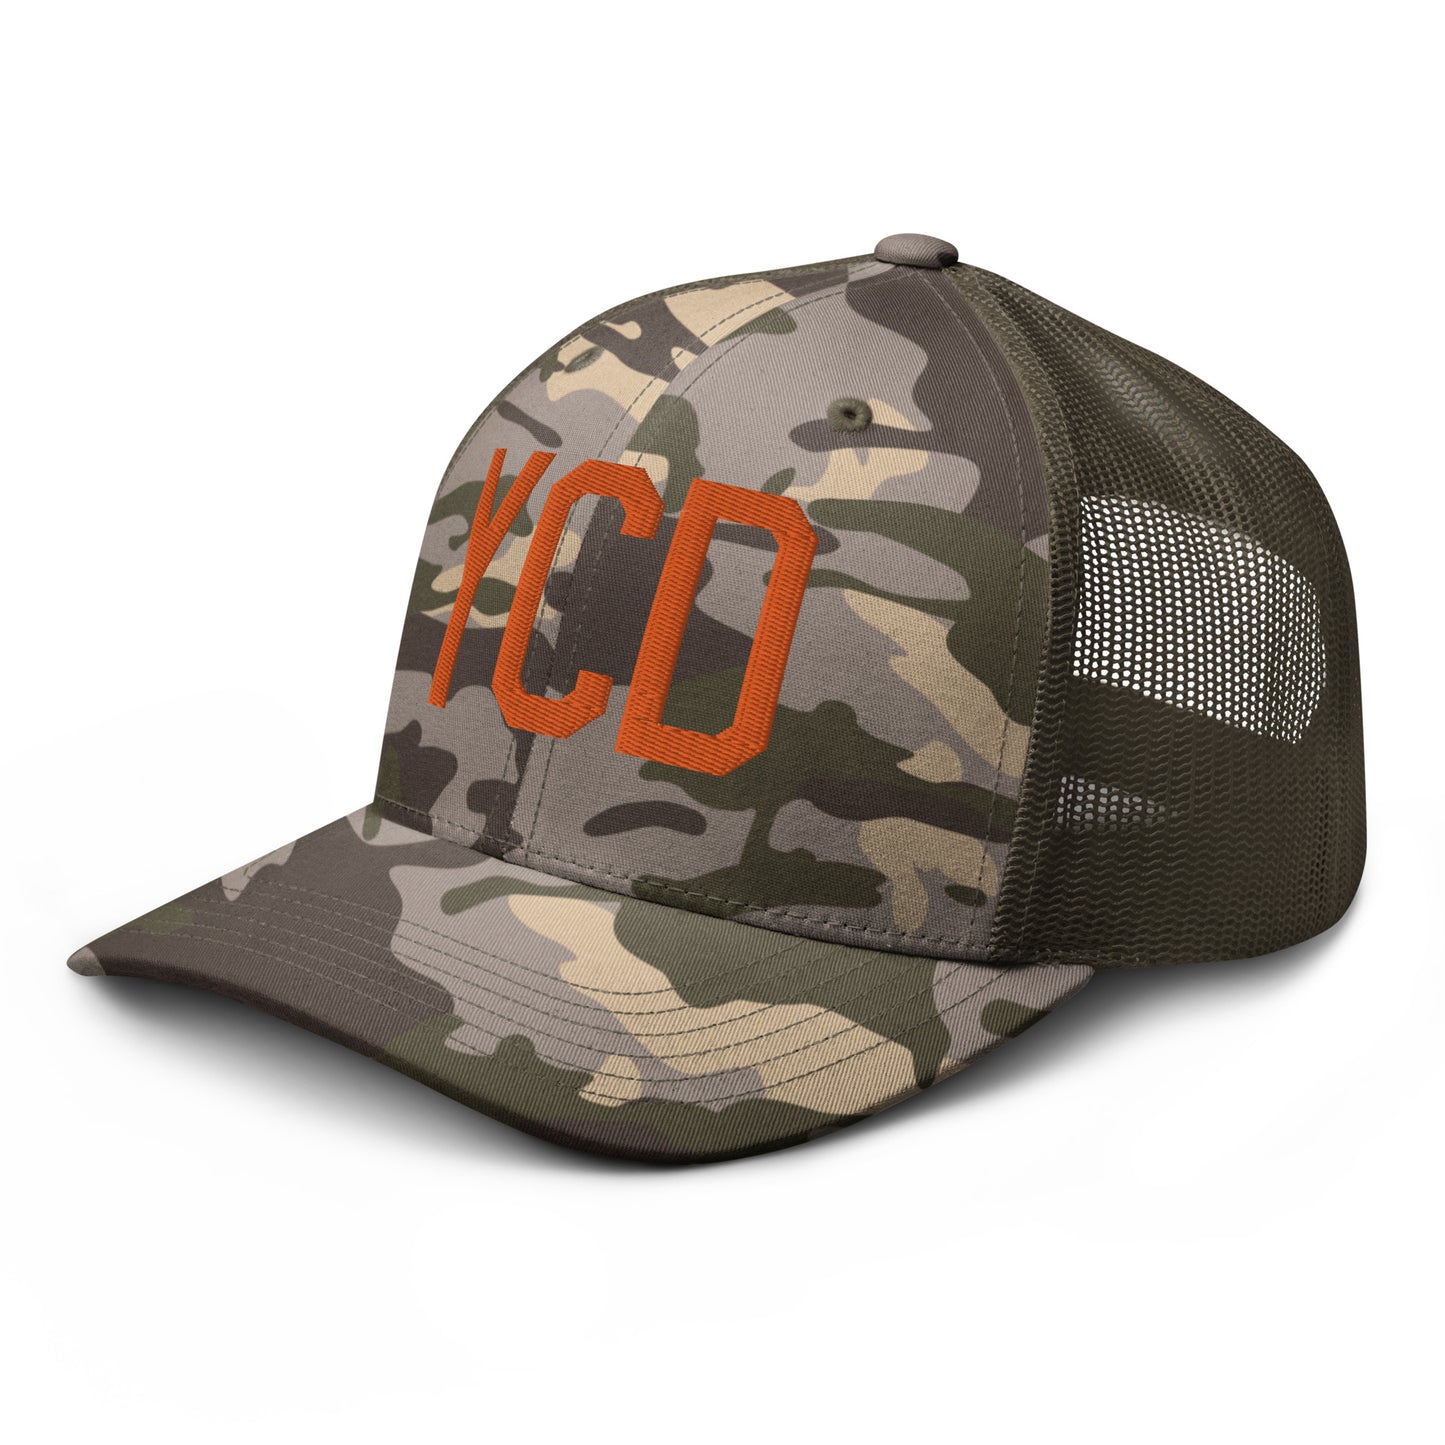 Airport Code Camouflage Trucker Hat - Orange • YCD Nanaimo • YHM Designs - Image 19